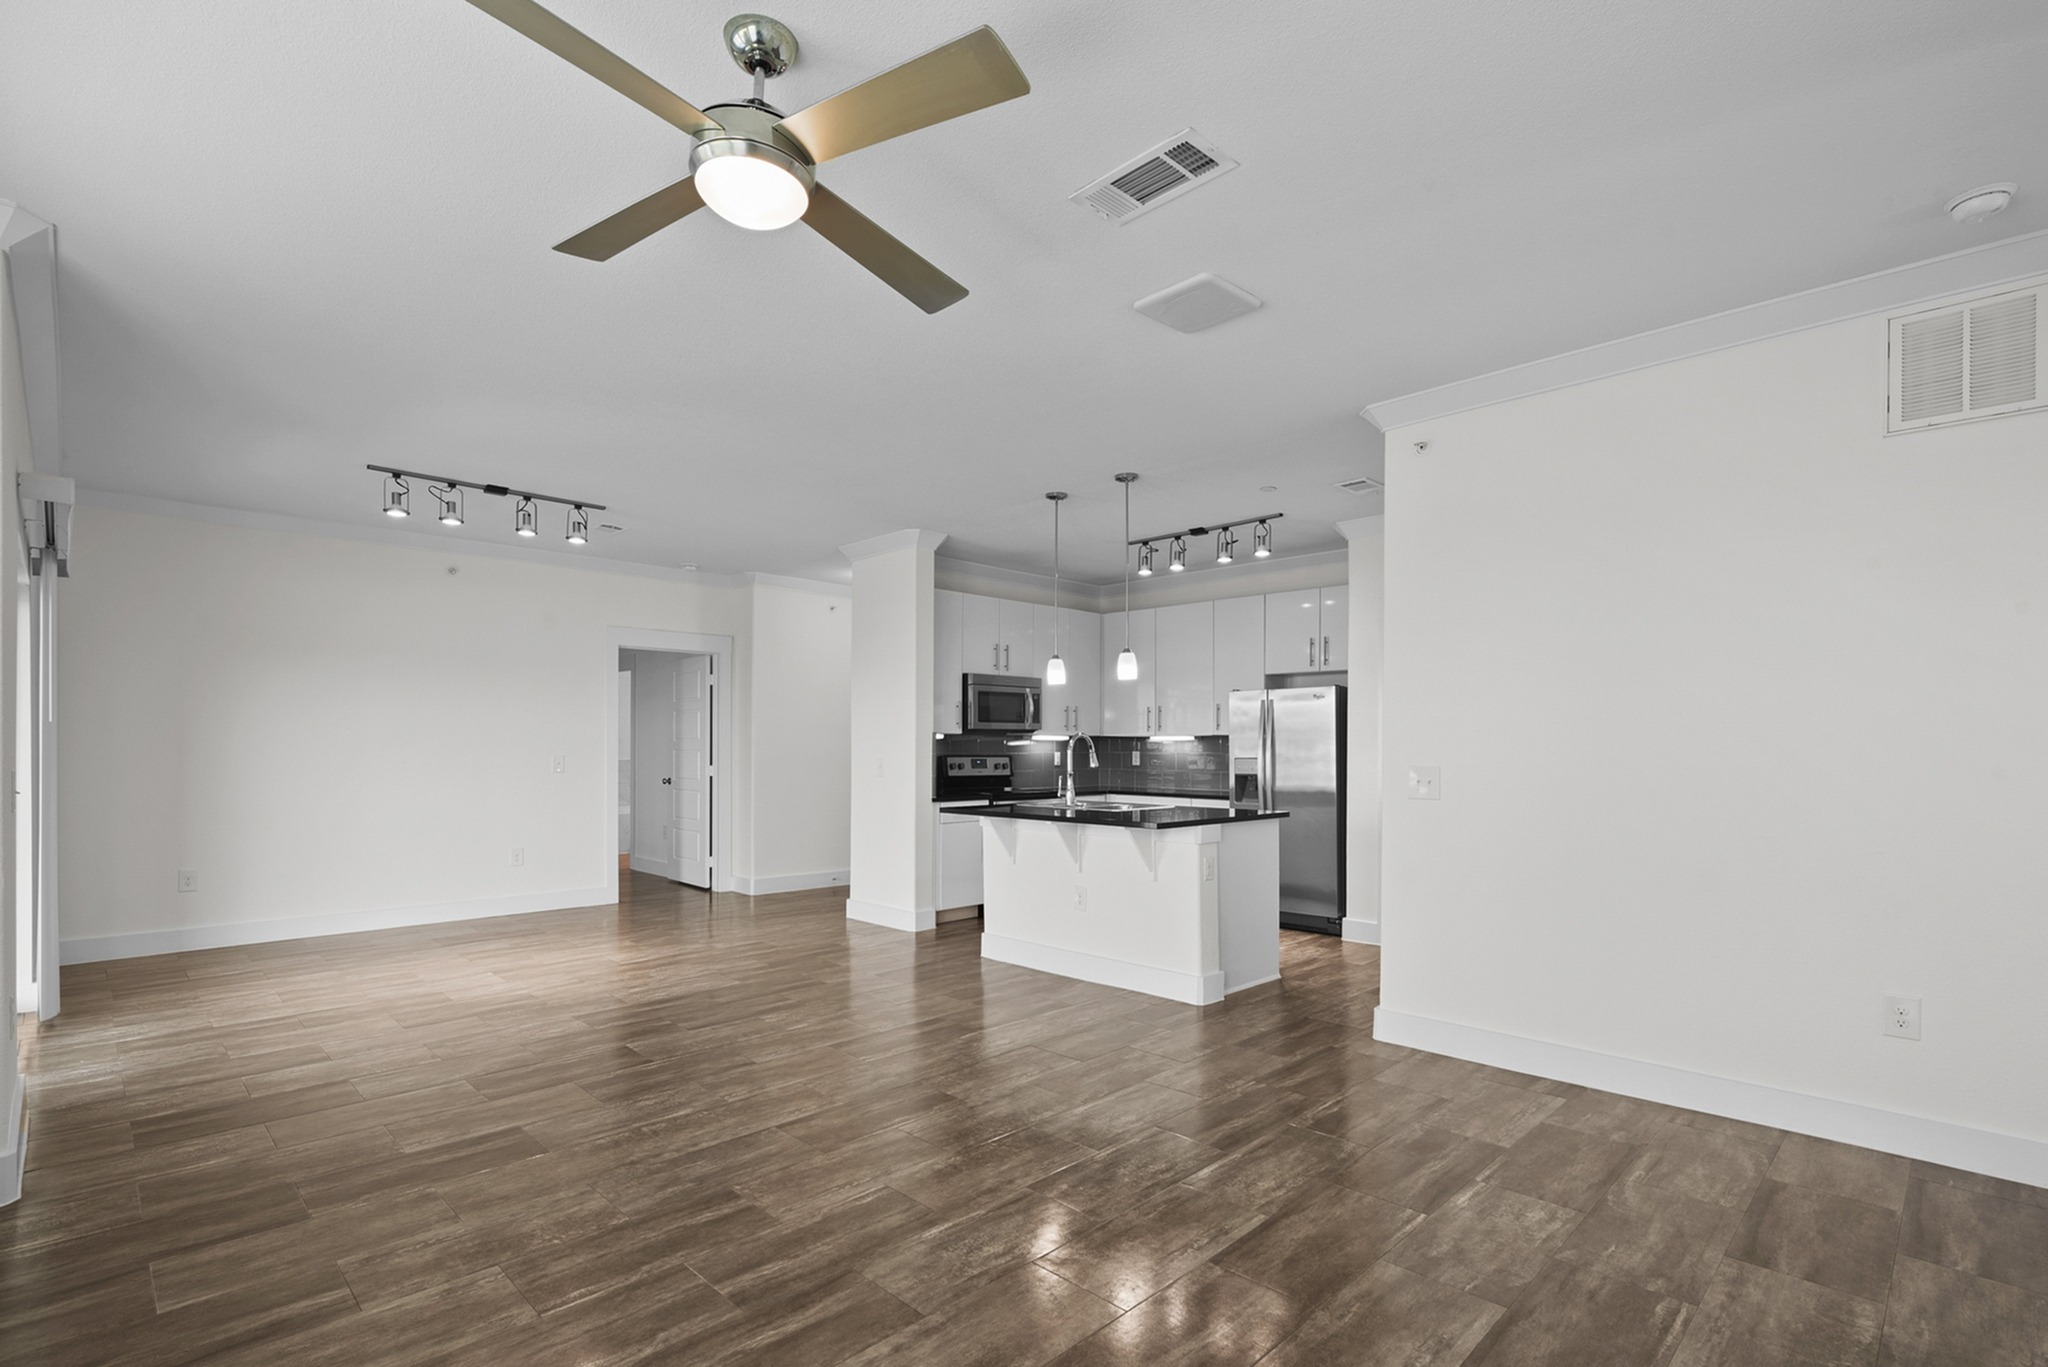 Floor Plan 6 Ceiling Fan | Conroe Apartments | The Towers Woodland